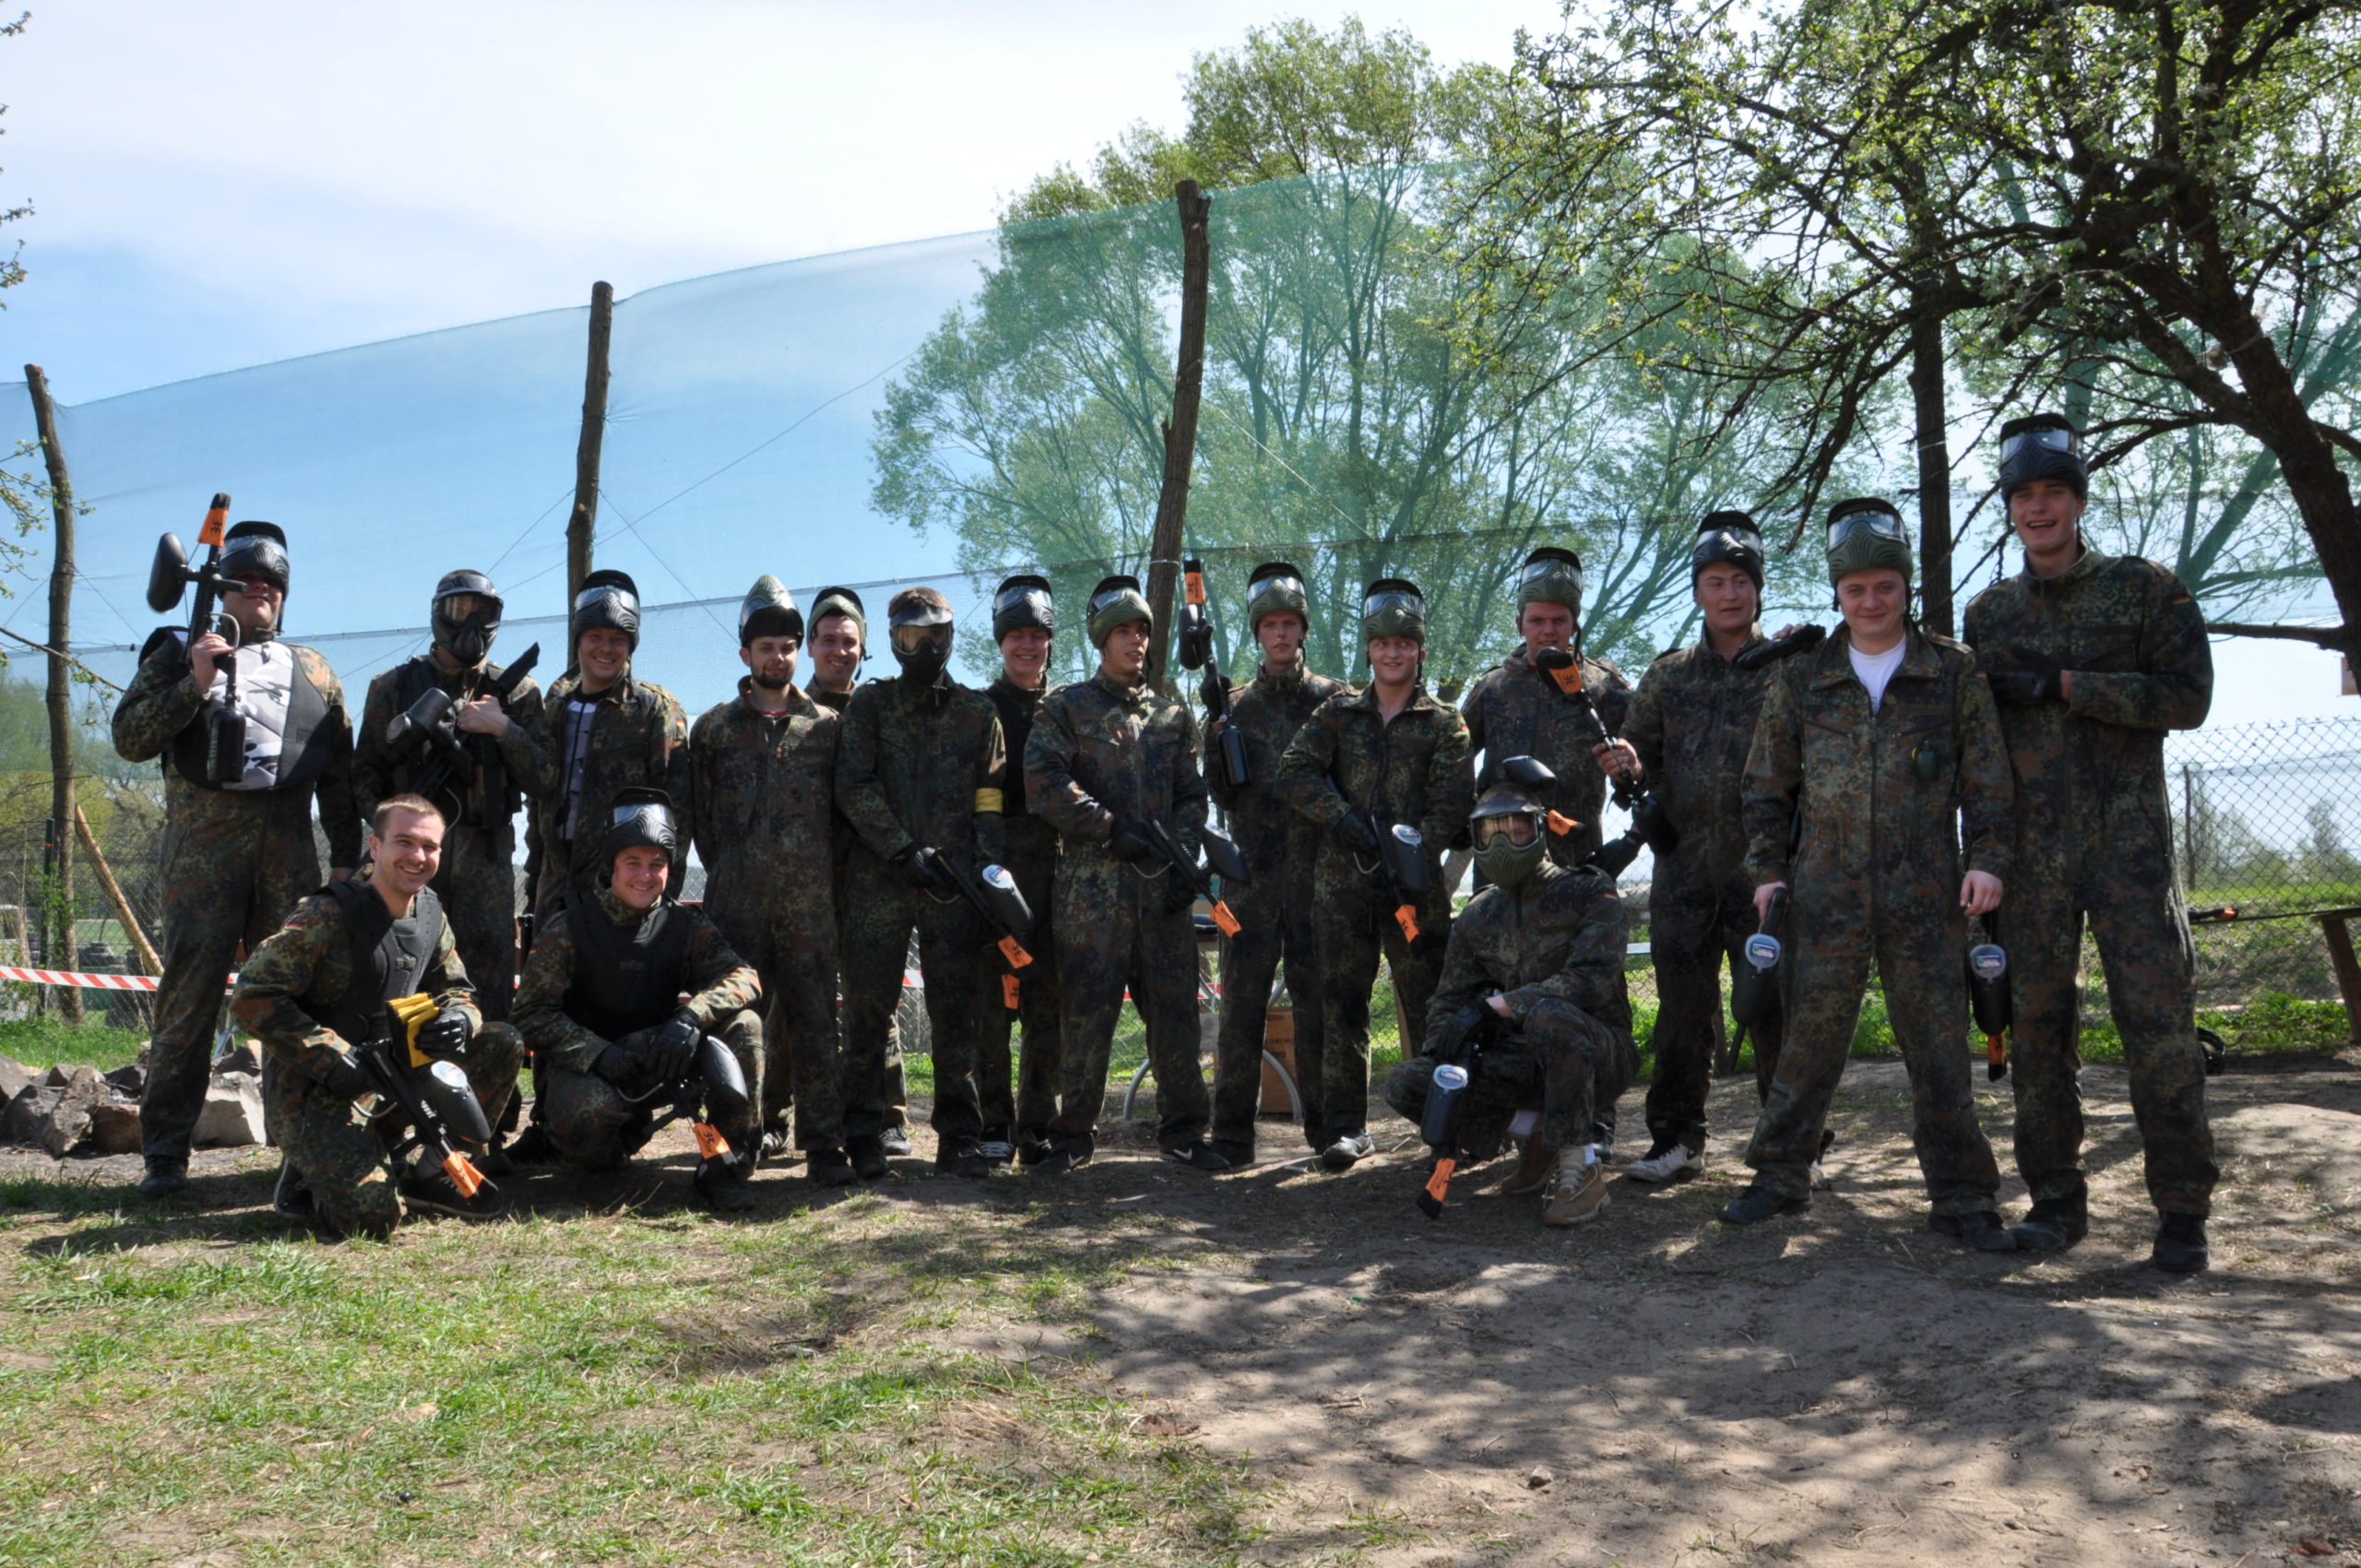 Once upon a time in Krasiejów – Paintball